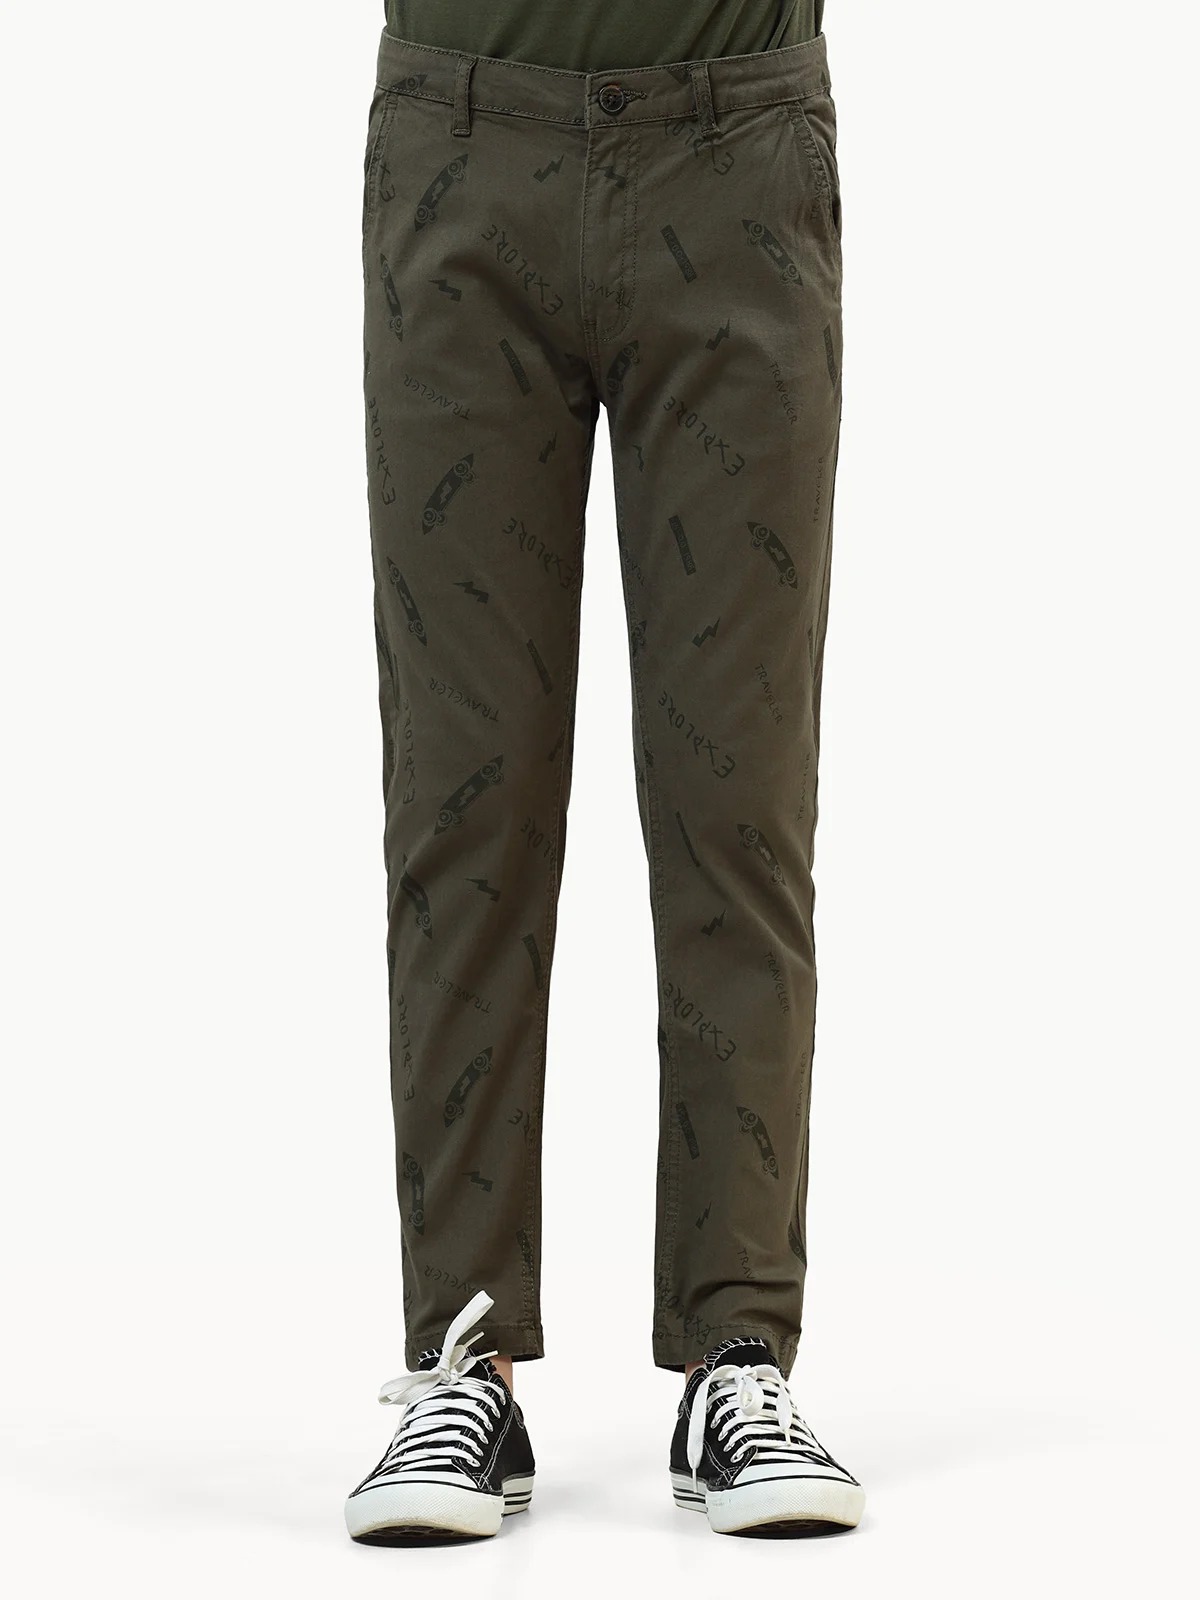 Boy's Olive Chino Pant - EBBCP21-002